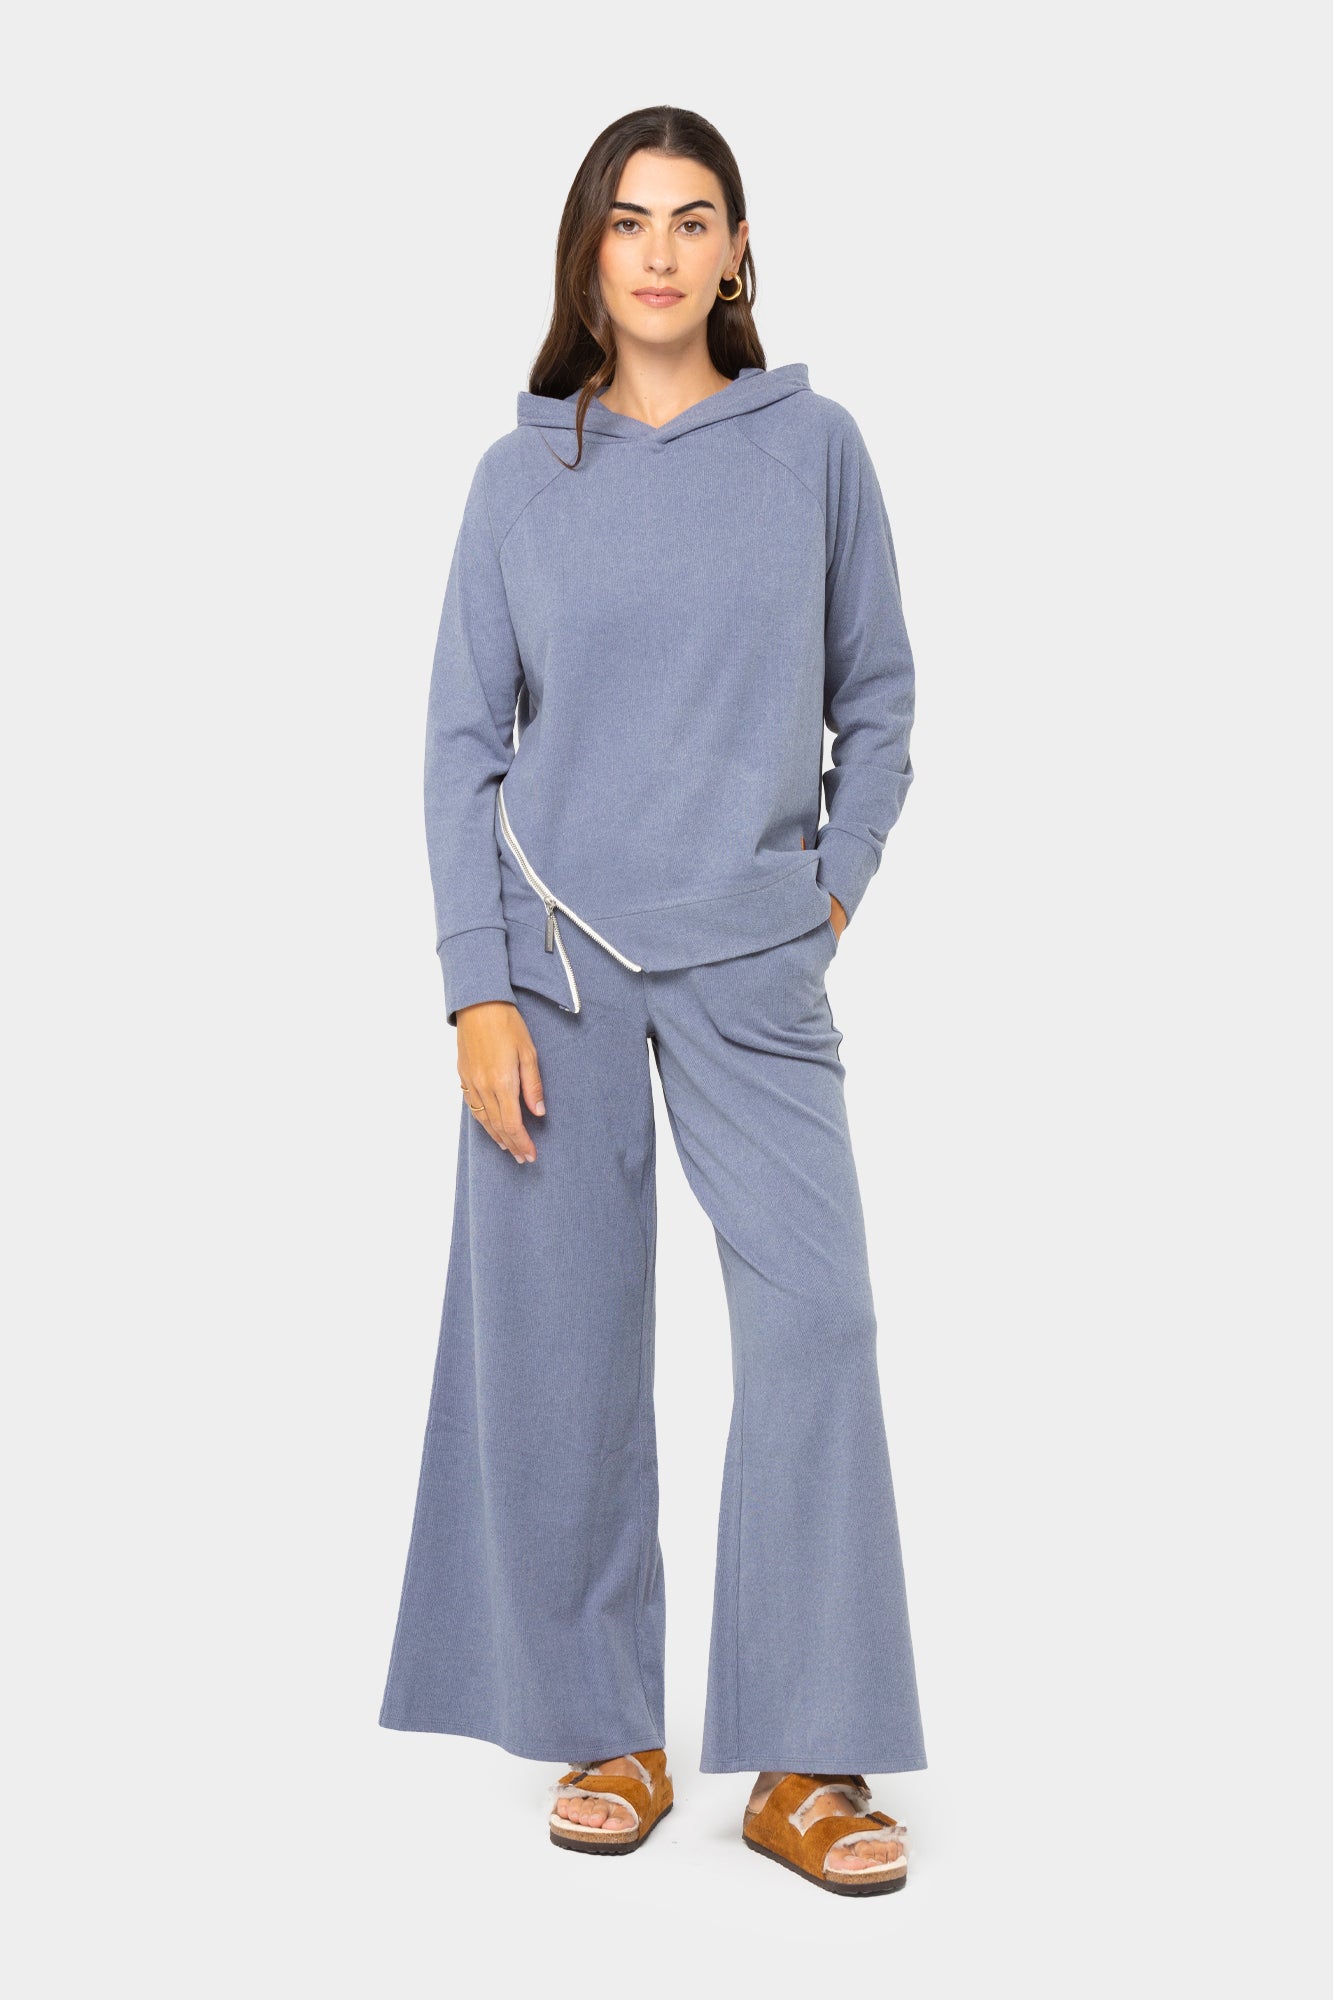 Textured Knit Monica Pant